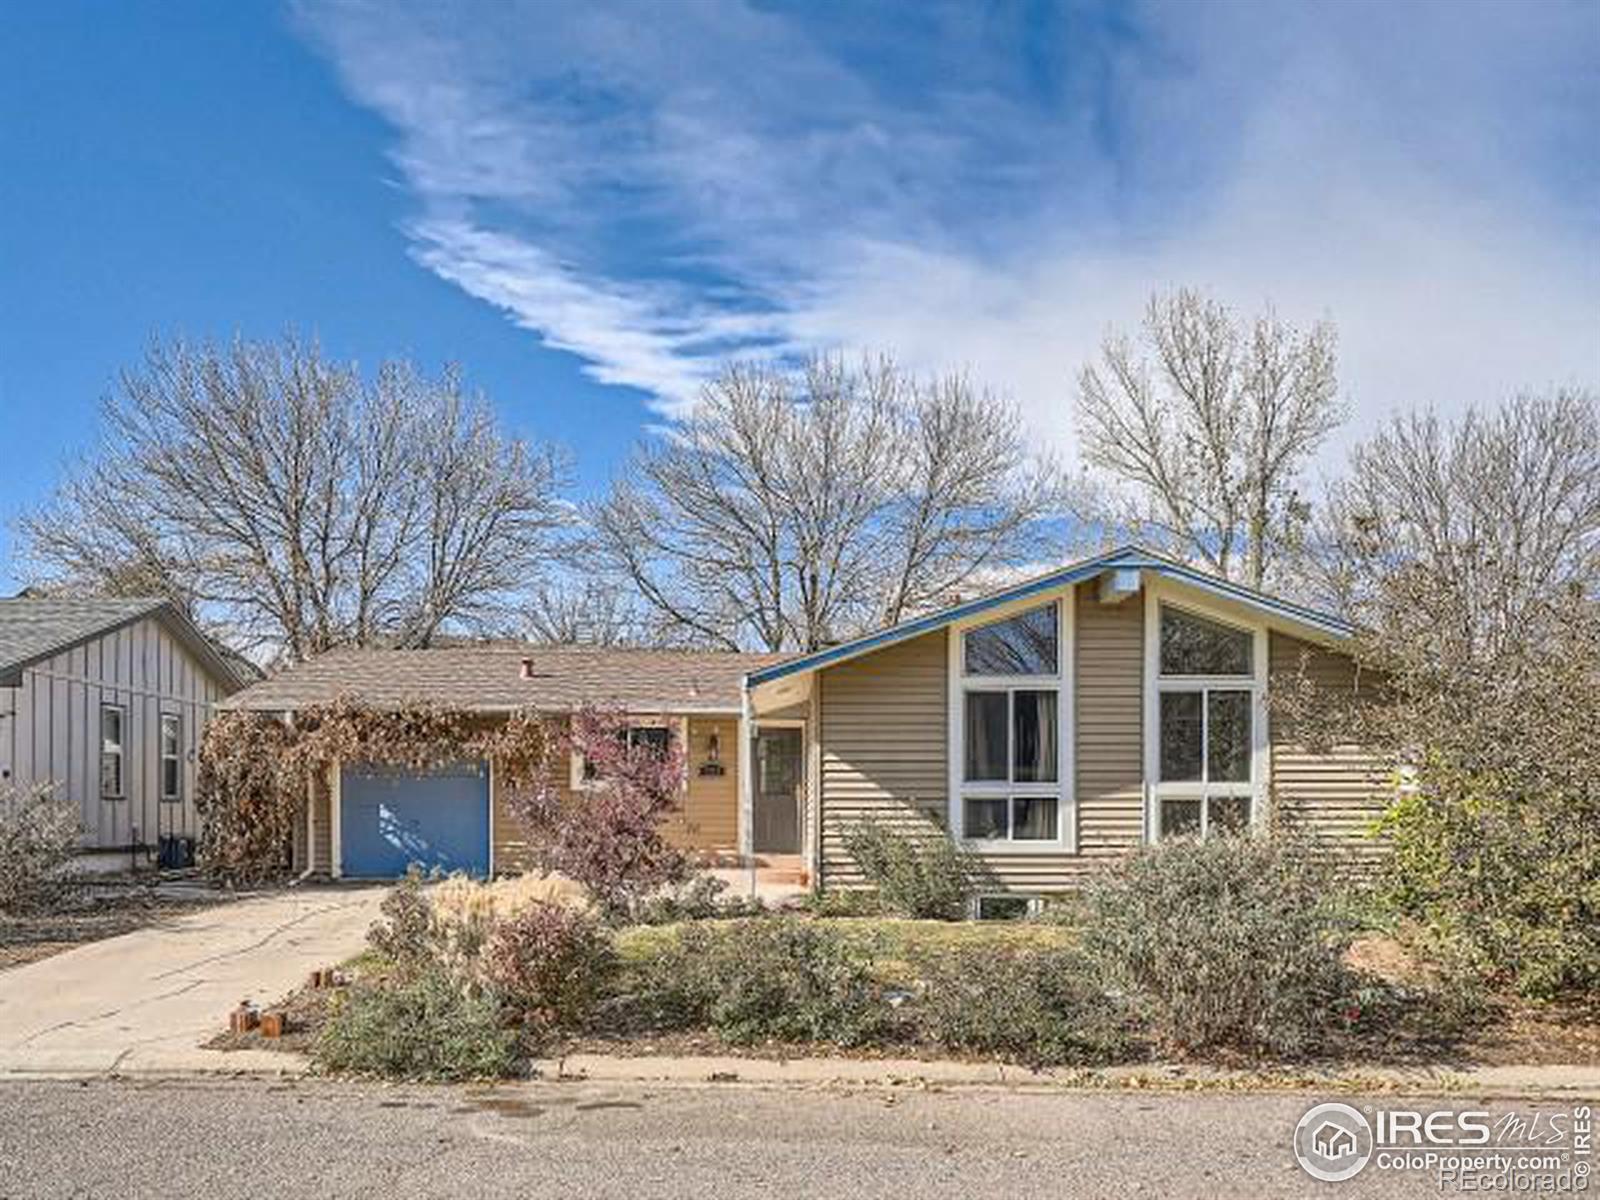 Report Image for 393  Cypress Street,Broomfield, Colorado